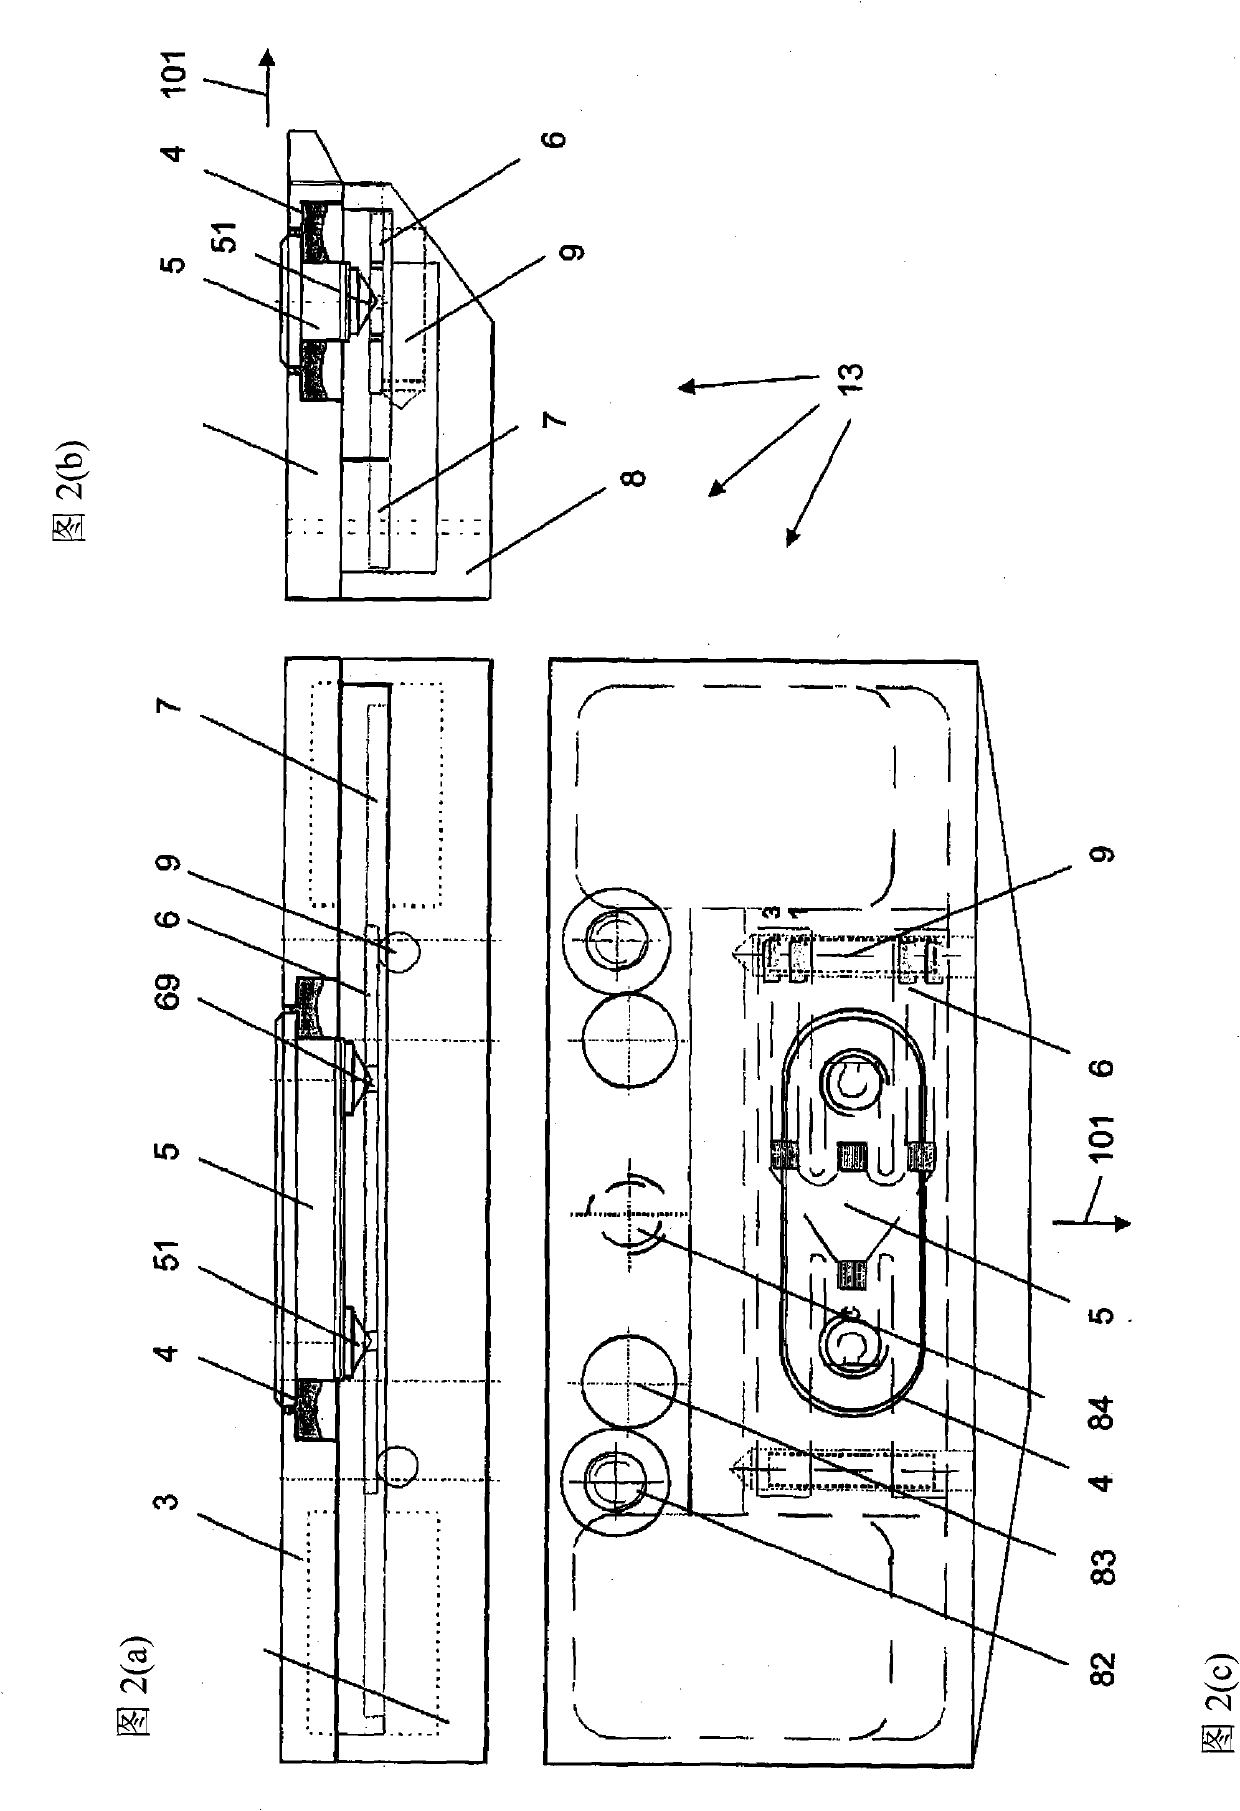 Device for measuring mass of movable fiber band